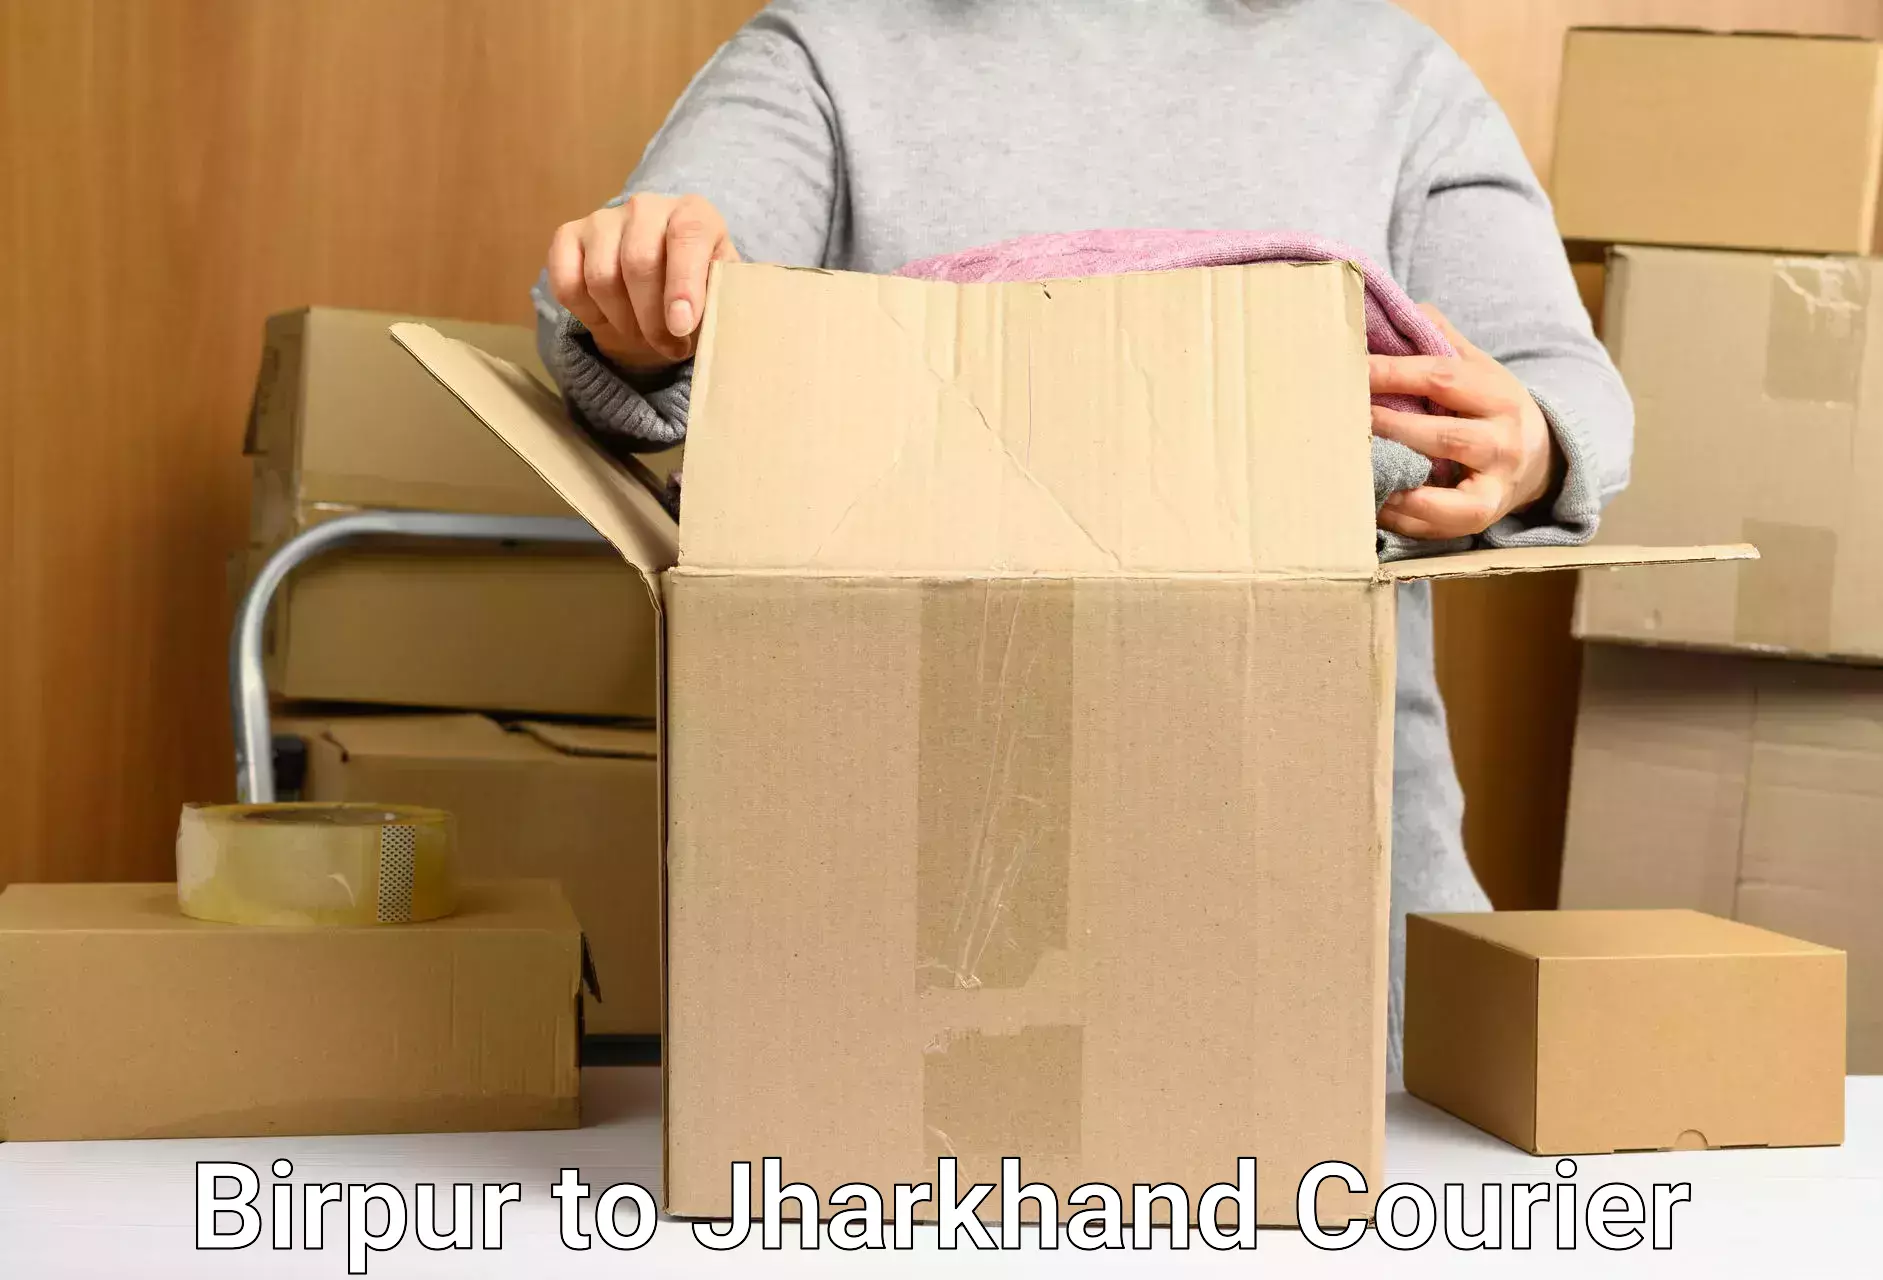 Nationwide parcel services Birpur to Jharkhand